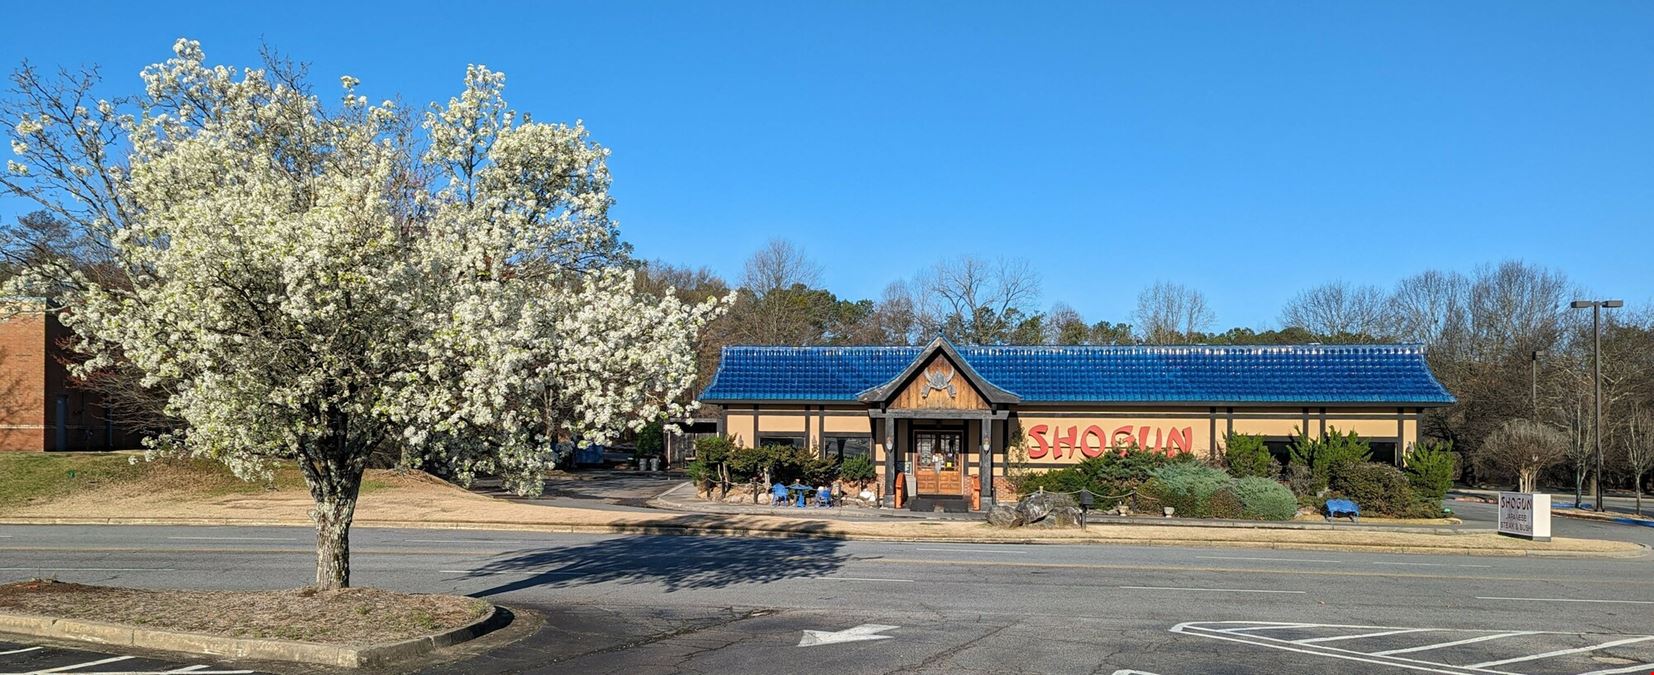 Towne Lake Restaurant and Business for Sale - Visible from I-575/I-75 - FF&E included - Free Standing Building